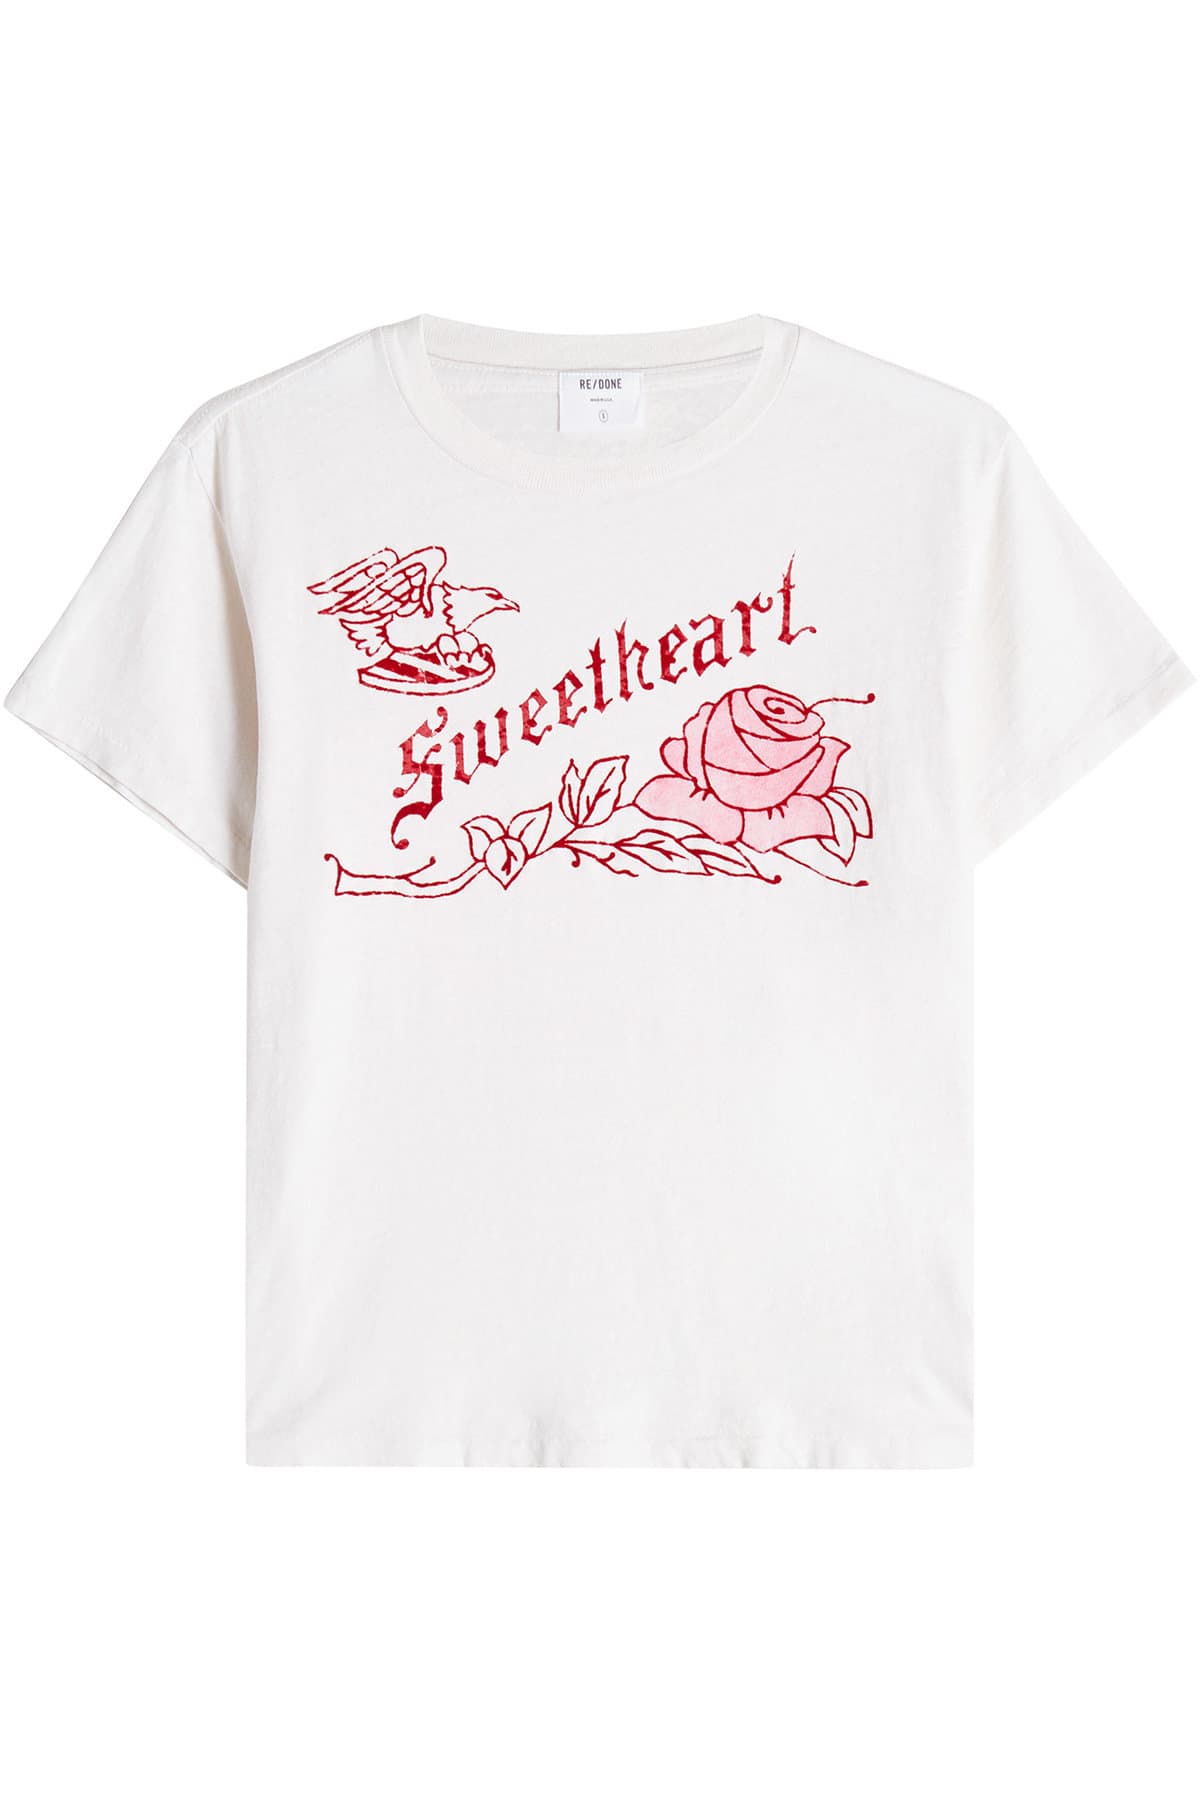 Sweetheart Printed Cotton T-Shirt by RE/DONE